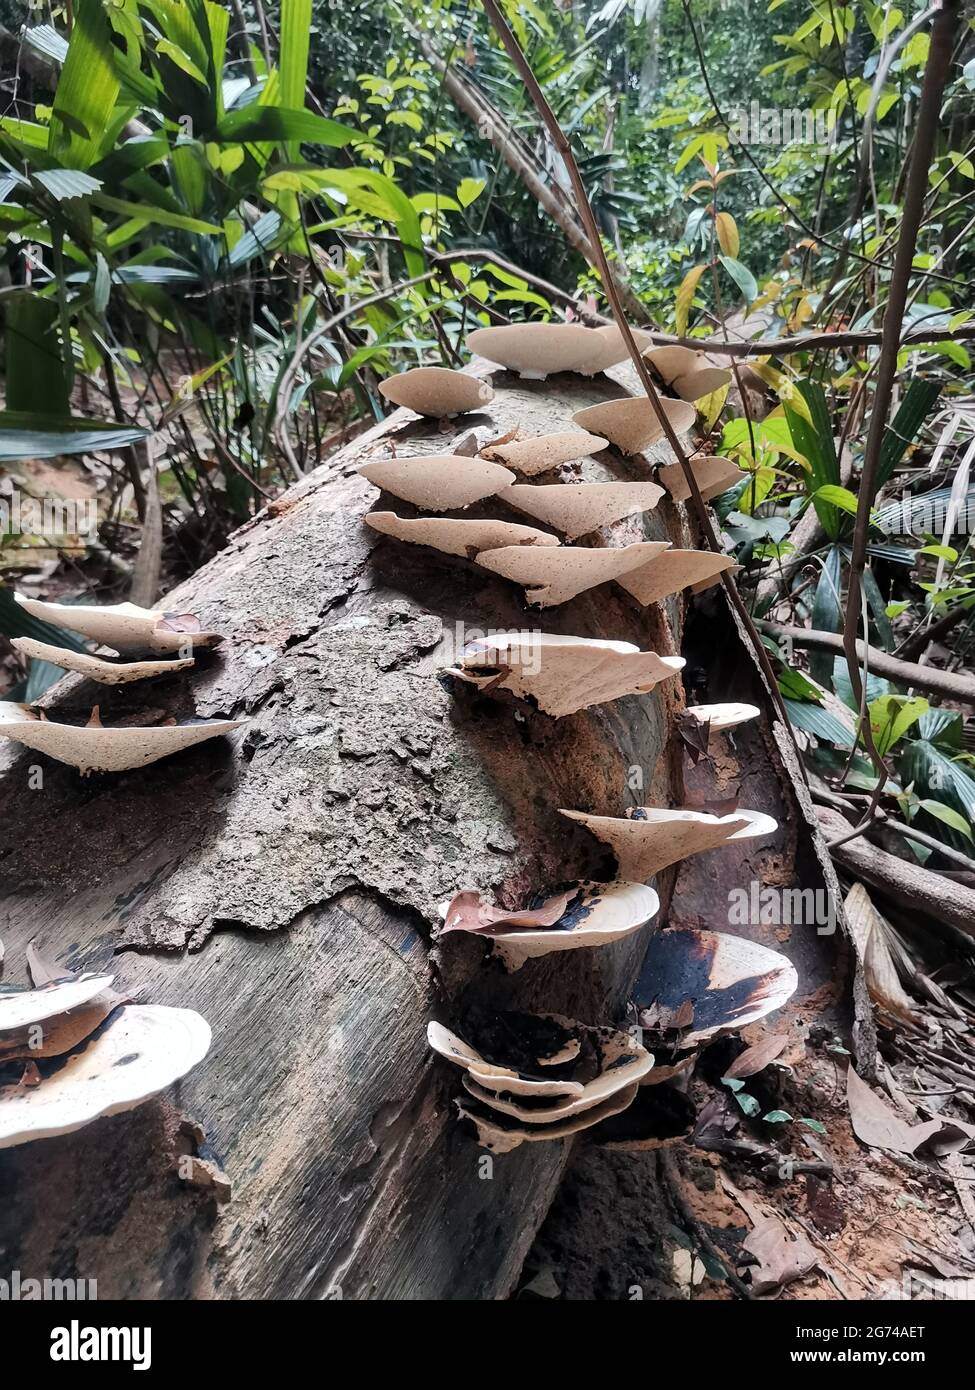 Mushrooms on a dead fallen tree trunk in the rainforest. Fungi mushroom species grows on recently cut or fallen logs. Milled lumber, rotted wood in tr Stock Photo